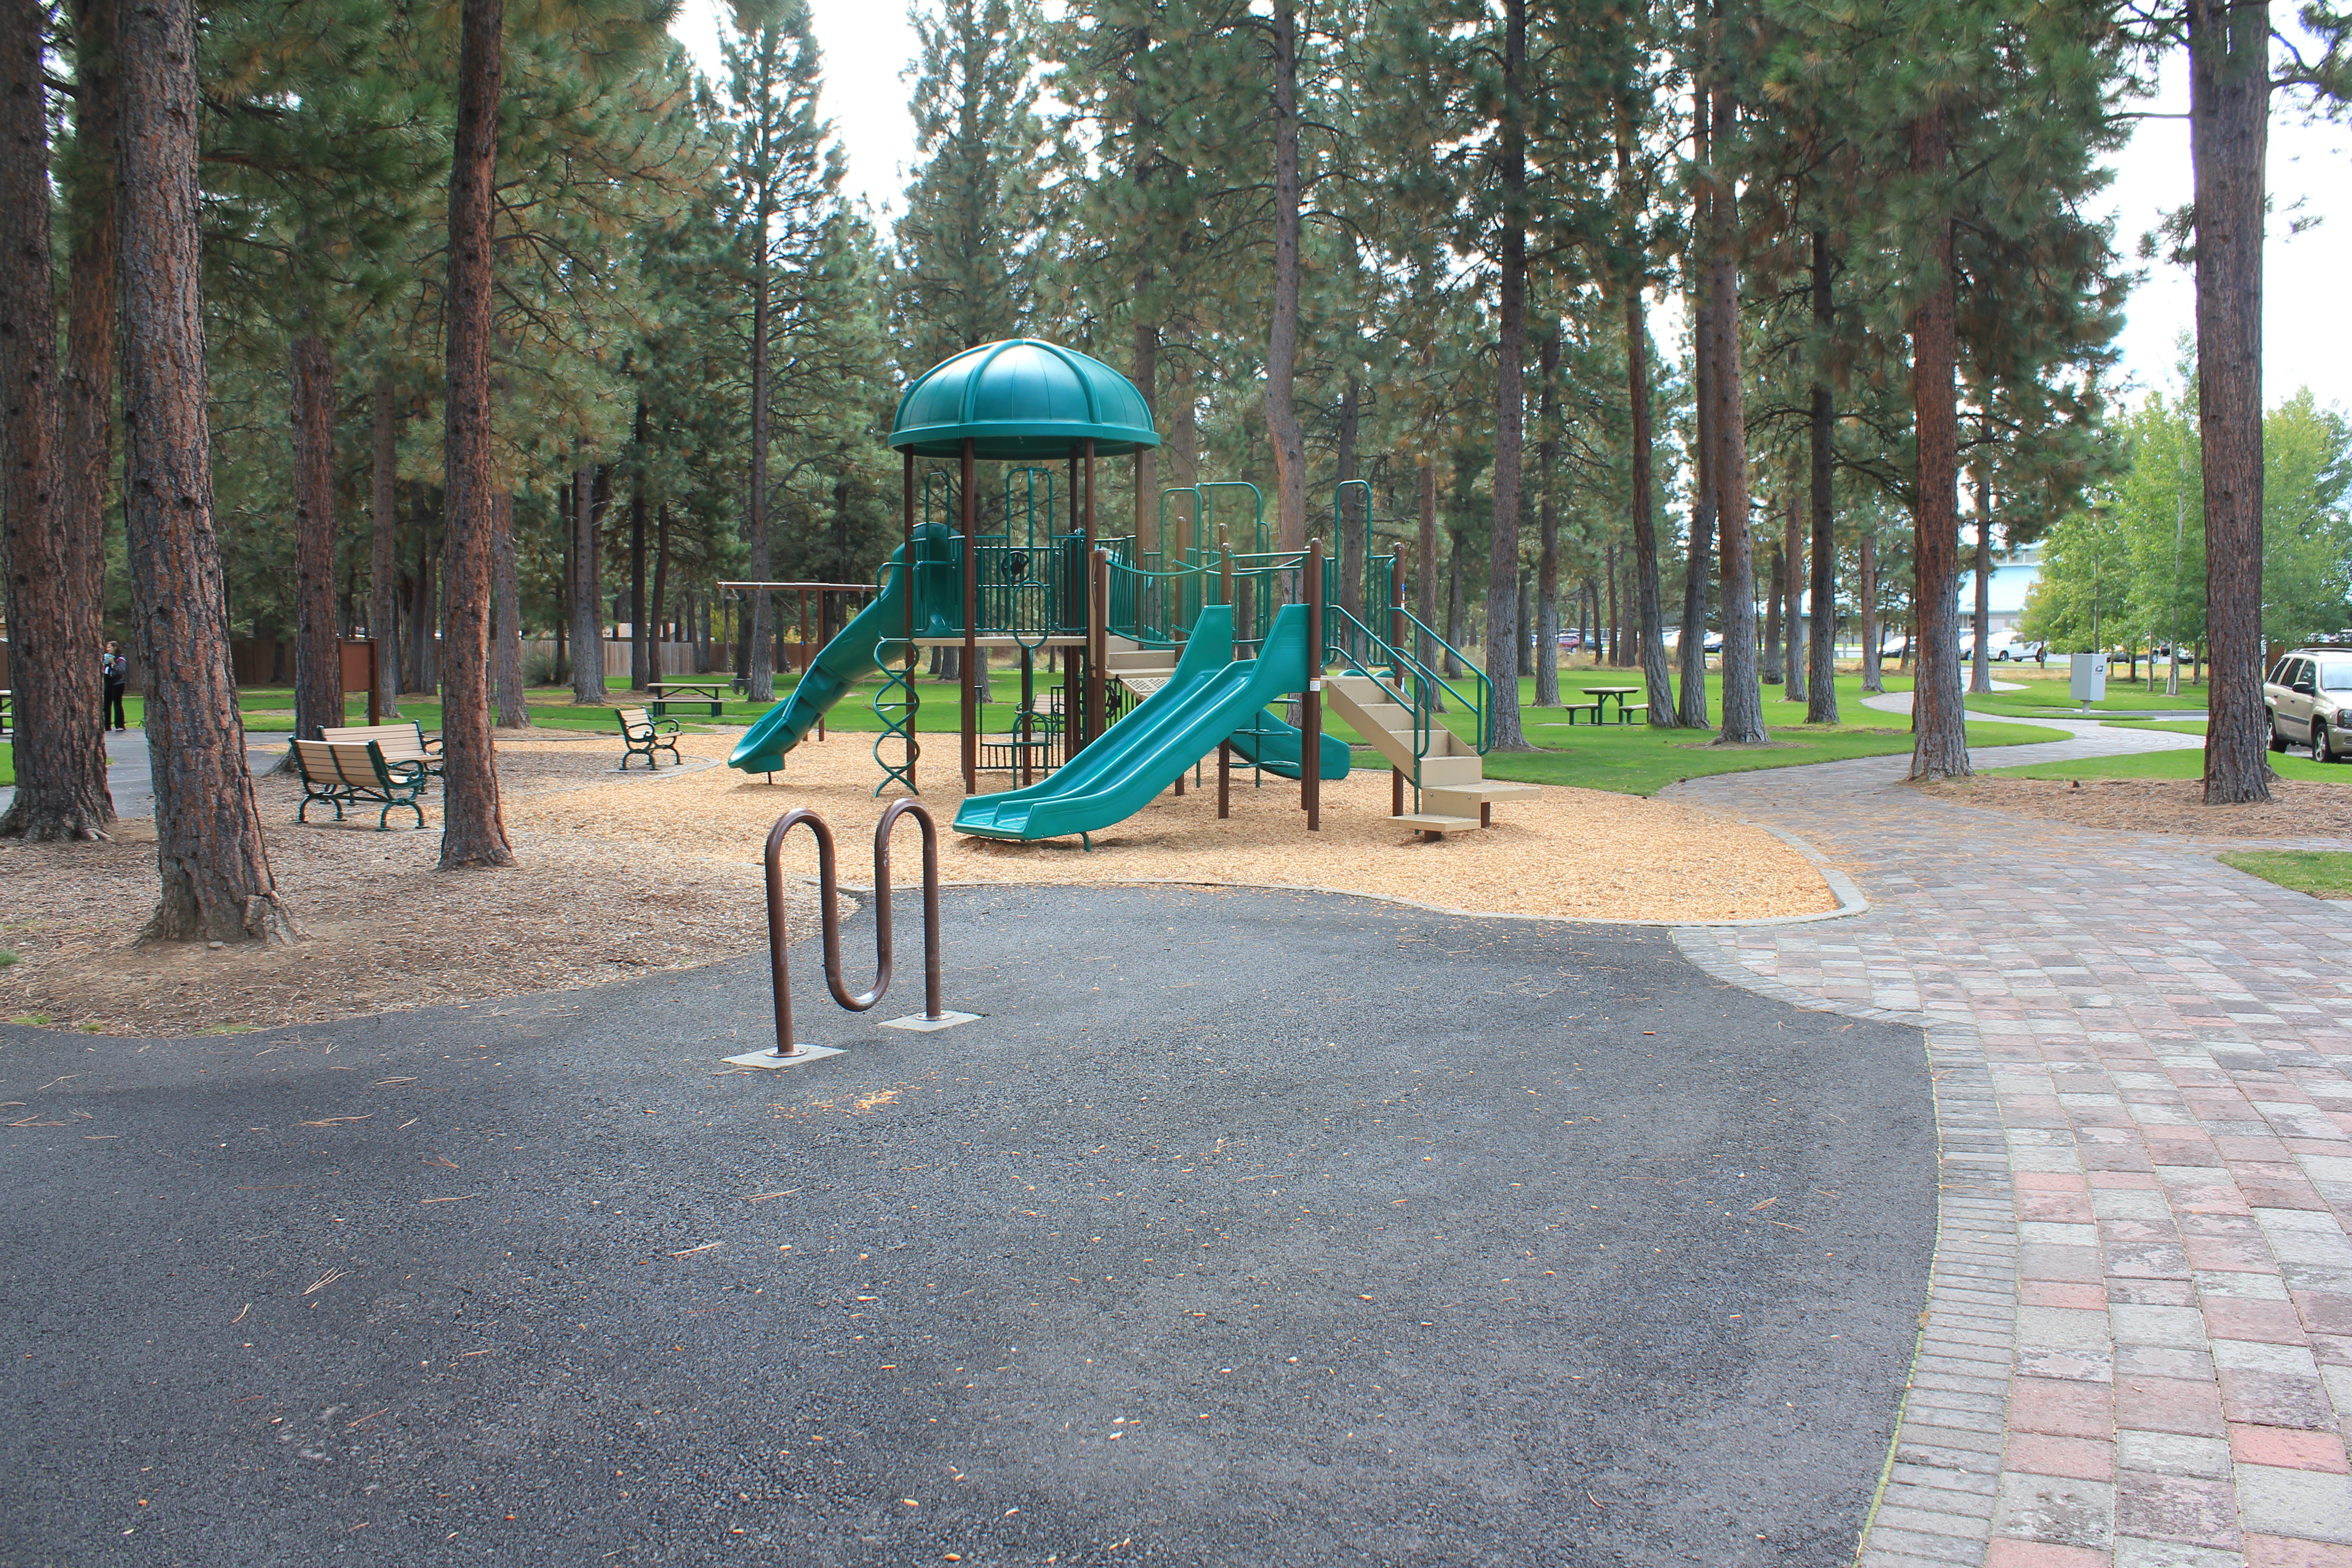 a bike rack and playground at hollygrape park